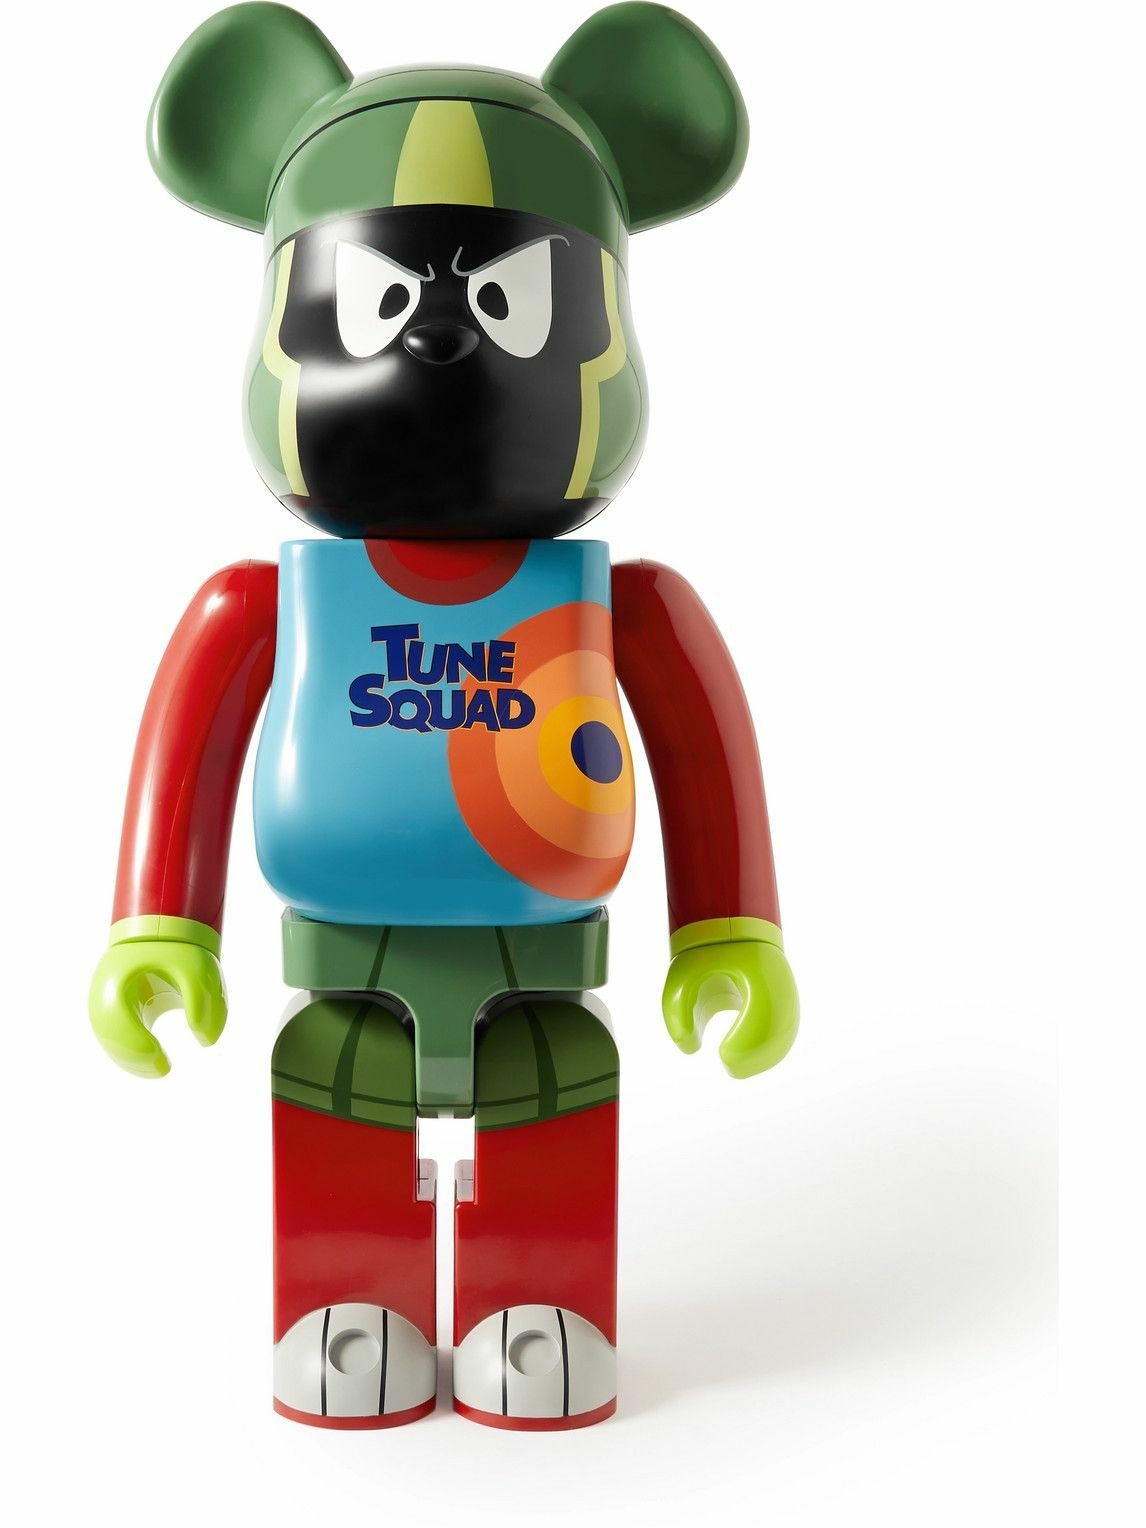 Photo: BE@RBRICK - Space Jam Marvin the Martian 1000% Printed PVC Figurine